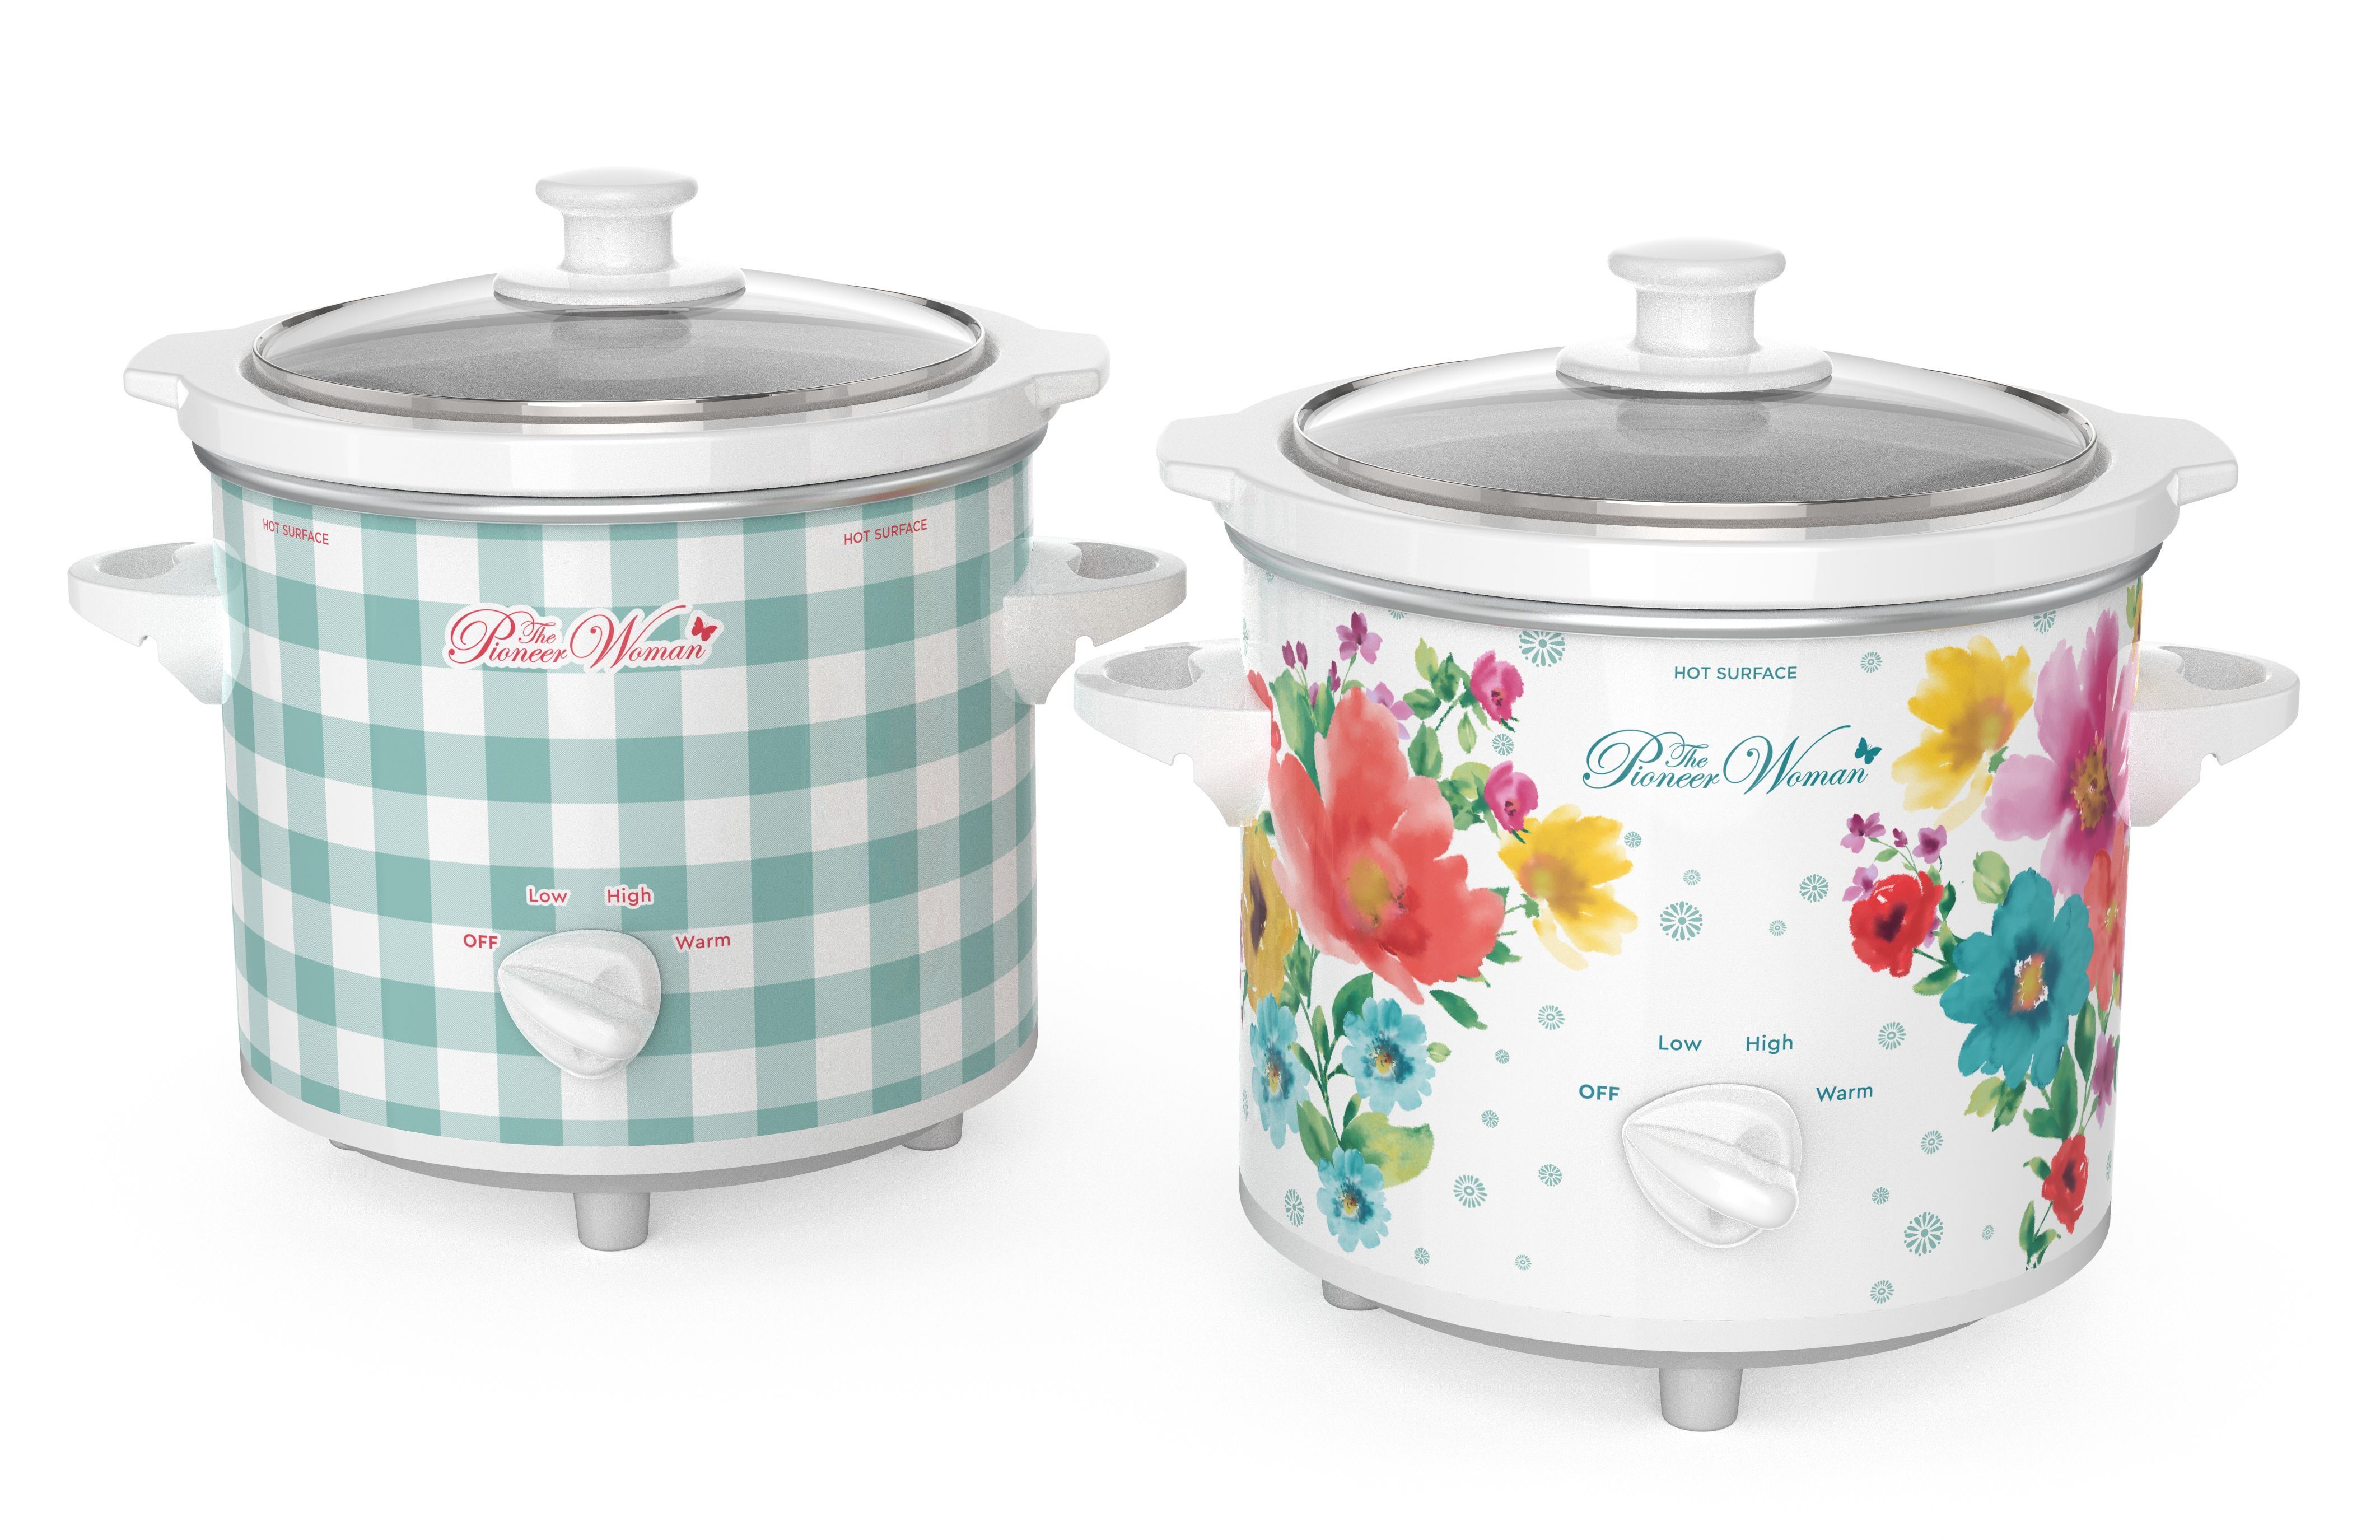 The Pioneer Woman Slow Cooker Twin Pack